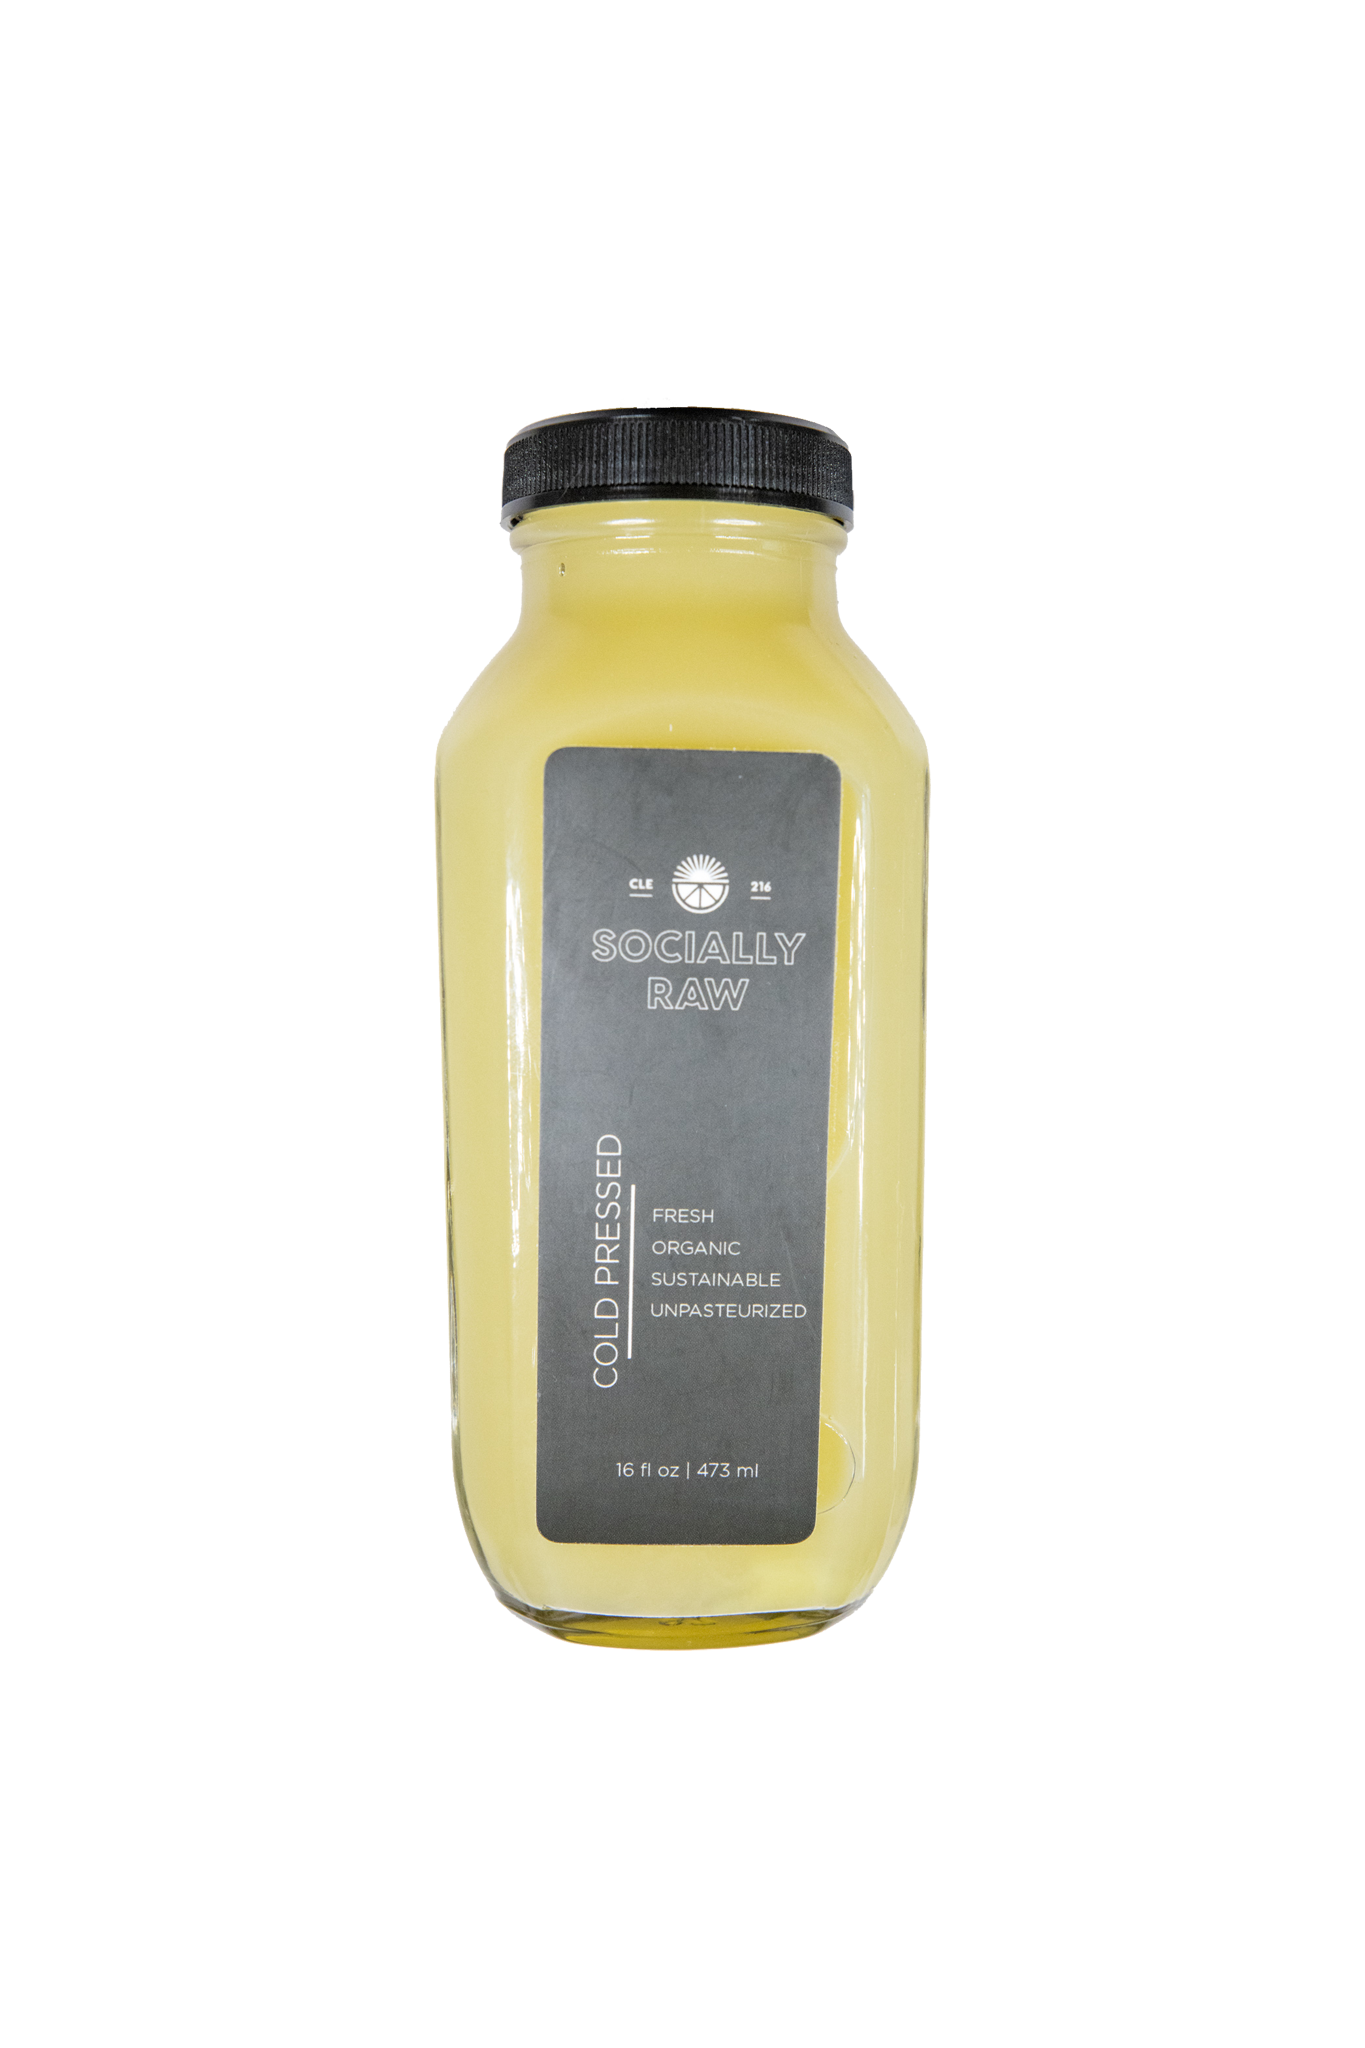 Juice Shop  100% RAW Organic Cold-Pressed Juices Cleanses & Elixirs